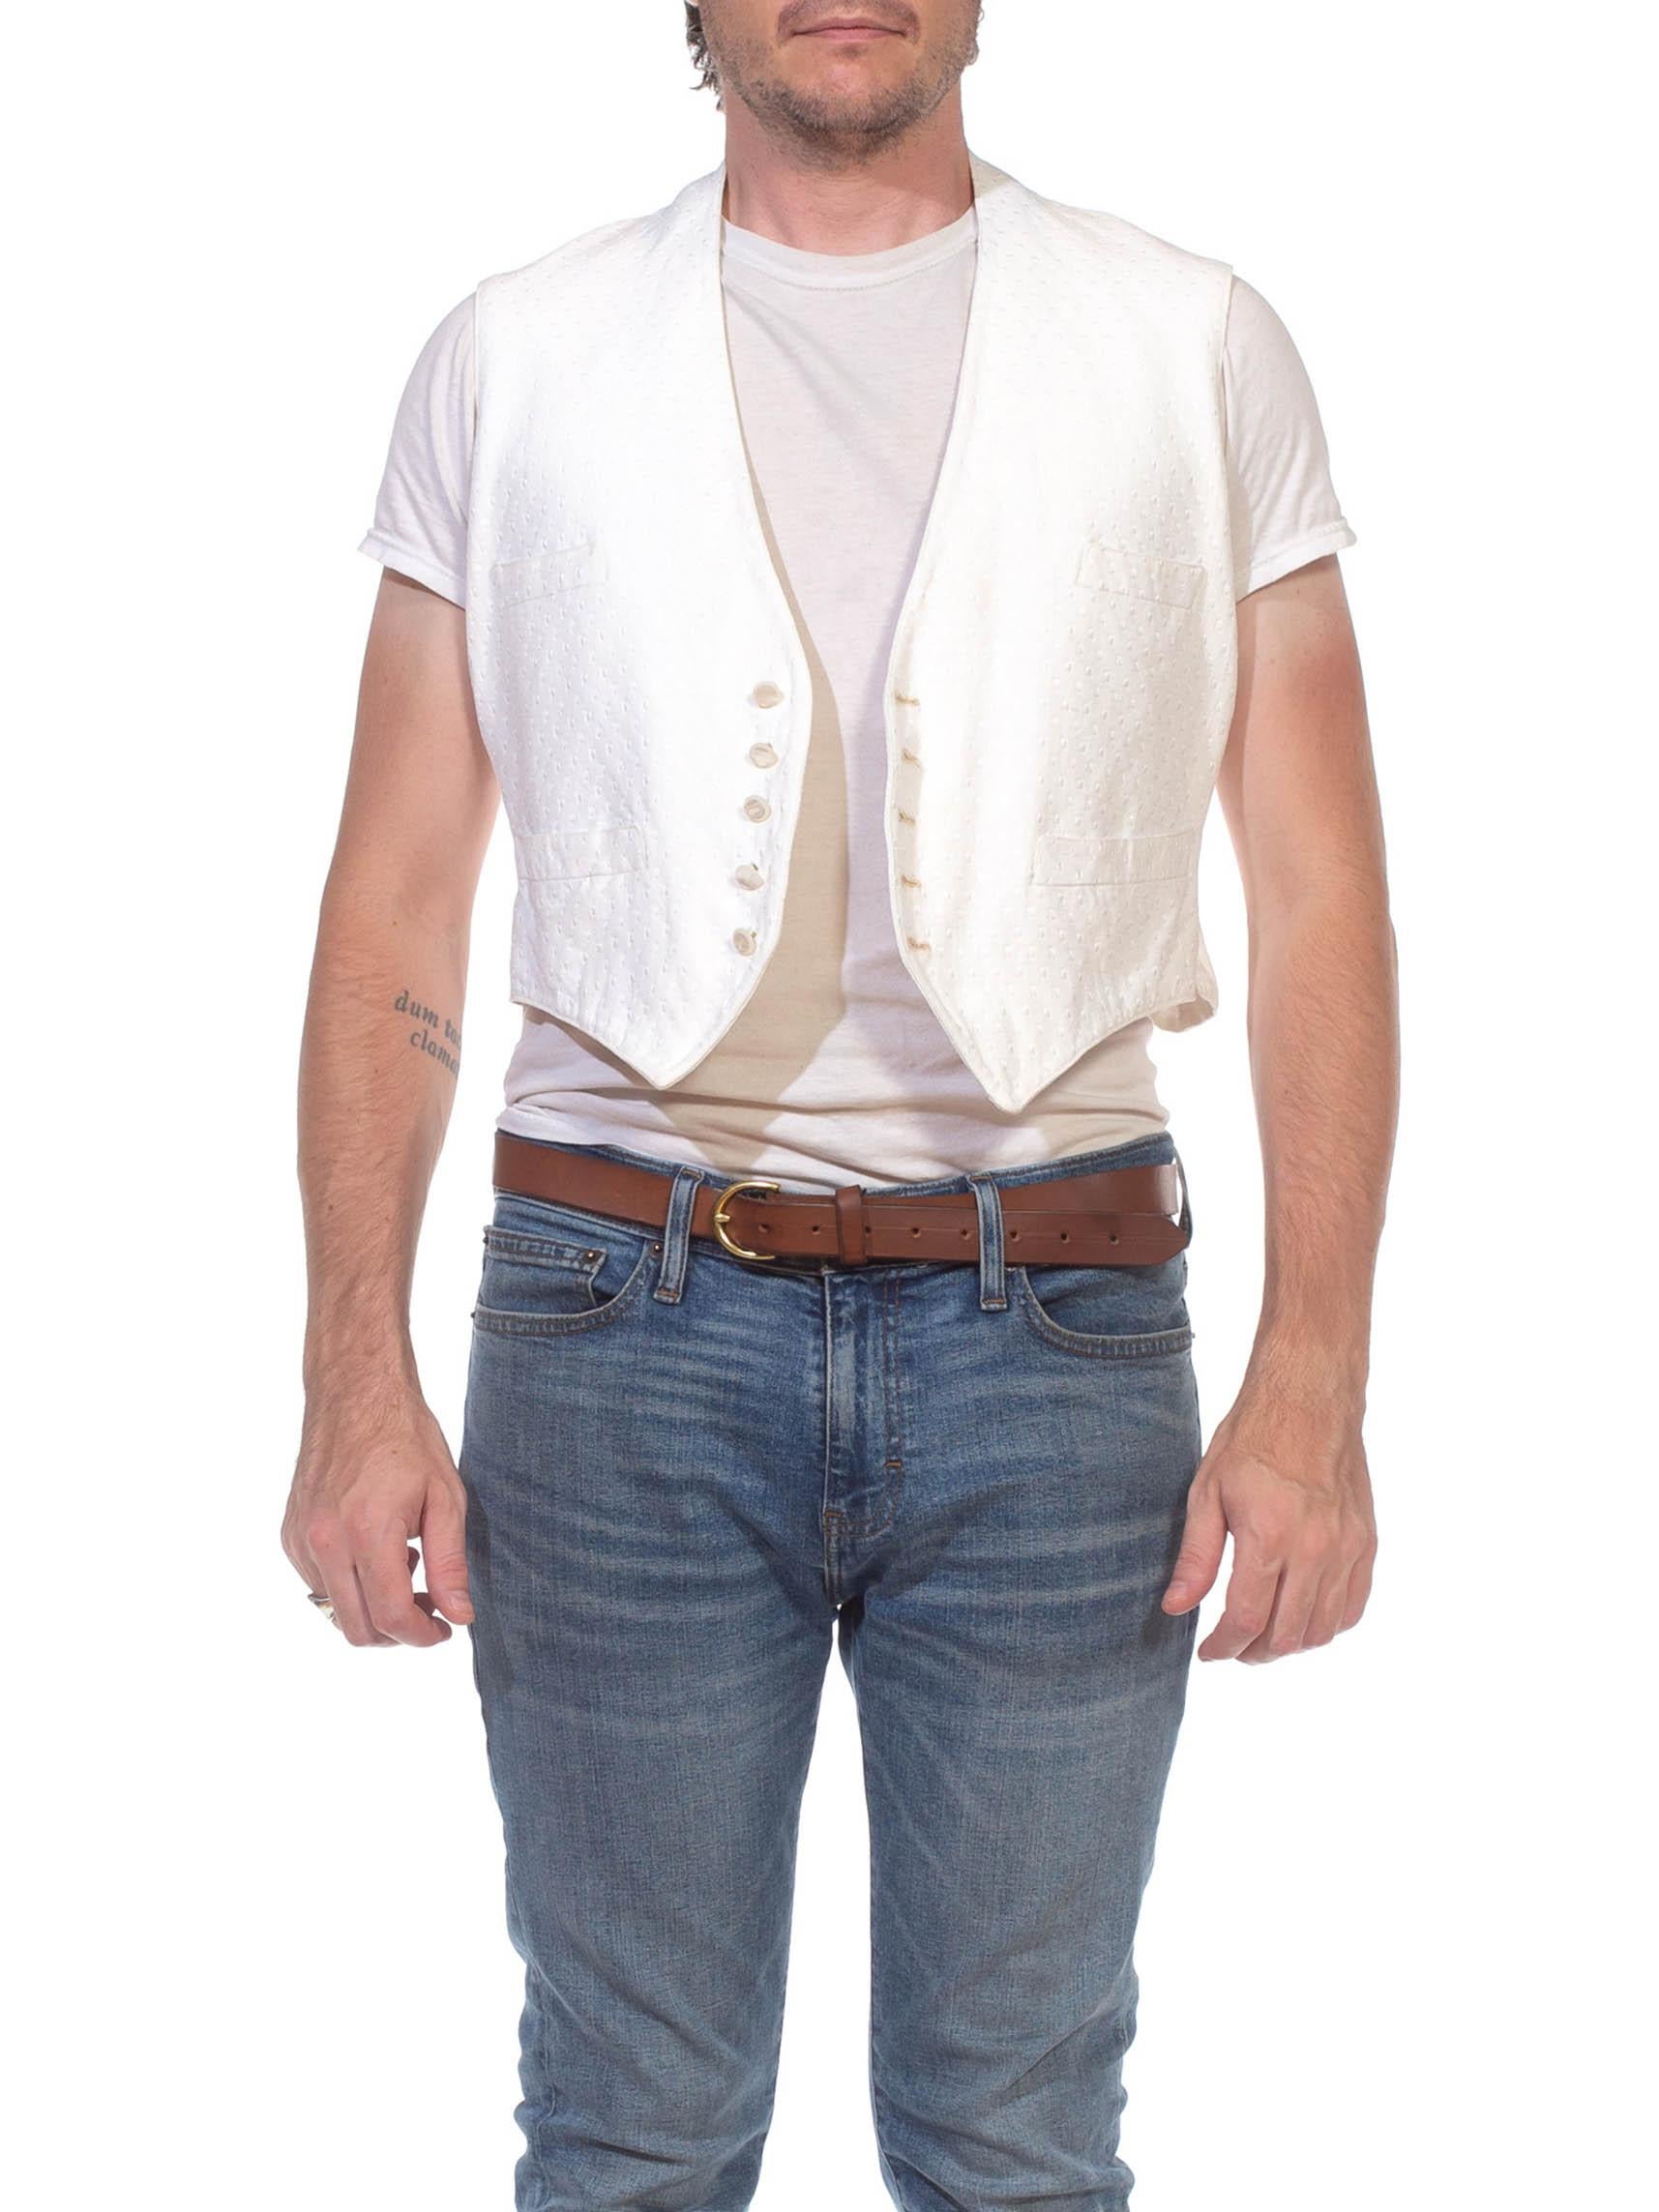 Buttons and Buckle are removable for laundering and starching.  Victorian White Cotton Mens 4-Pocket Buckle Back Vest With Beautiful Buttons & An Interesting Weave